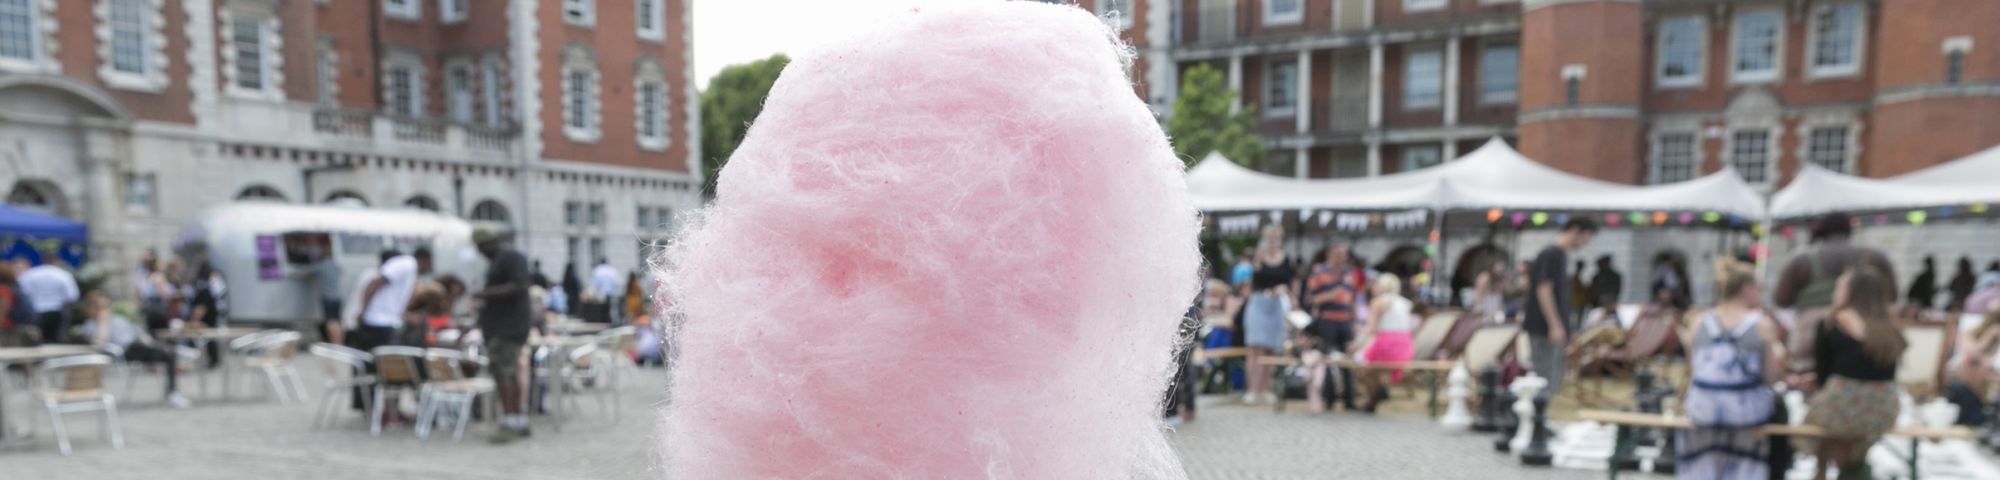 Candy floss at a festival